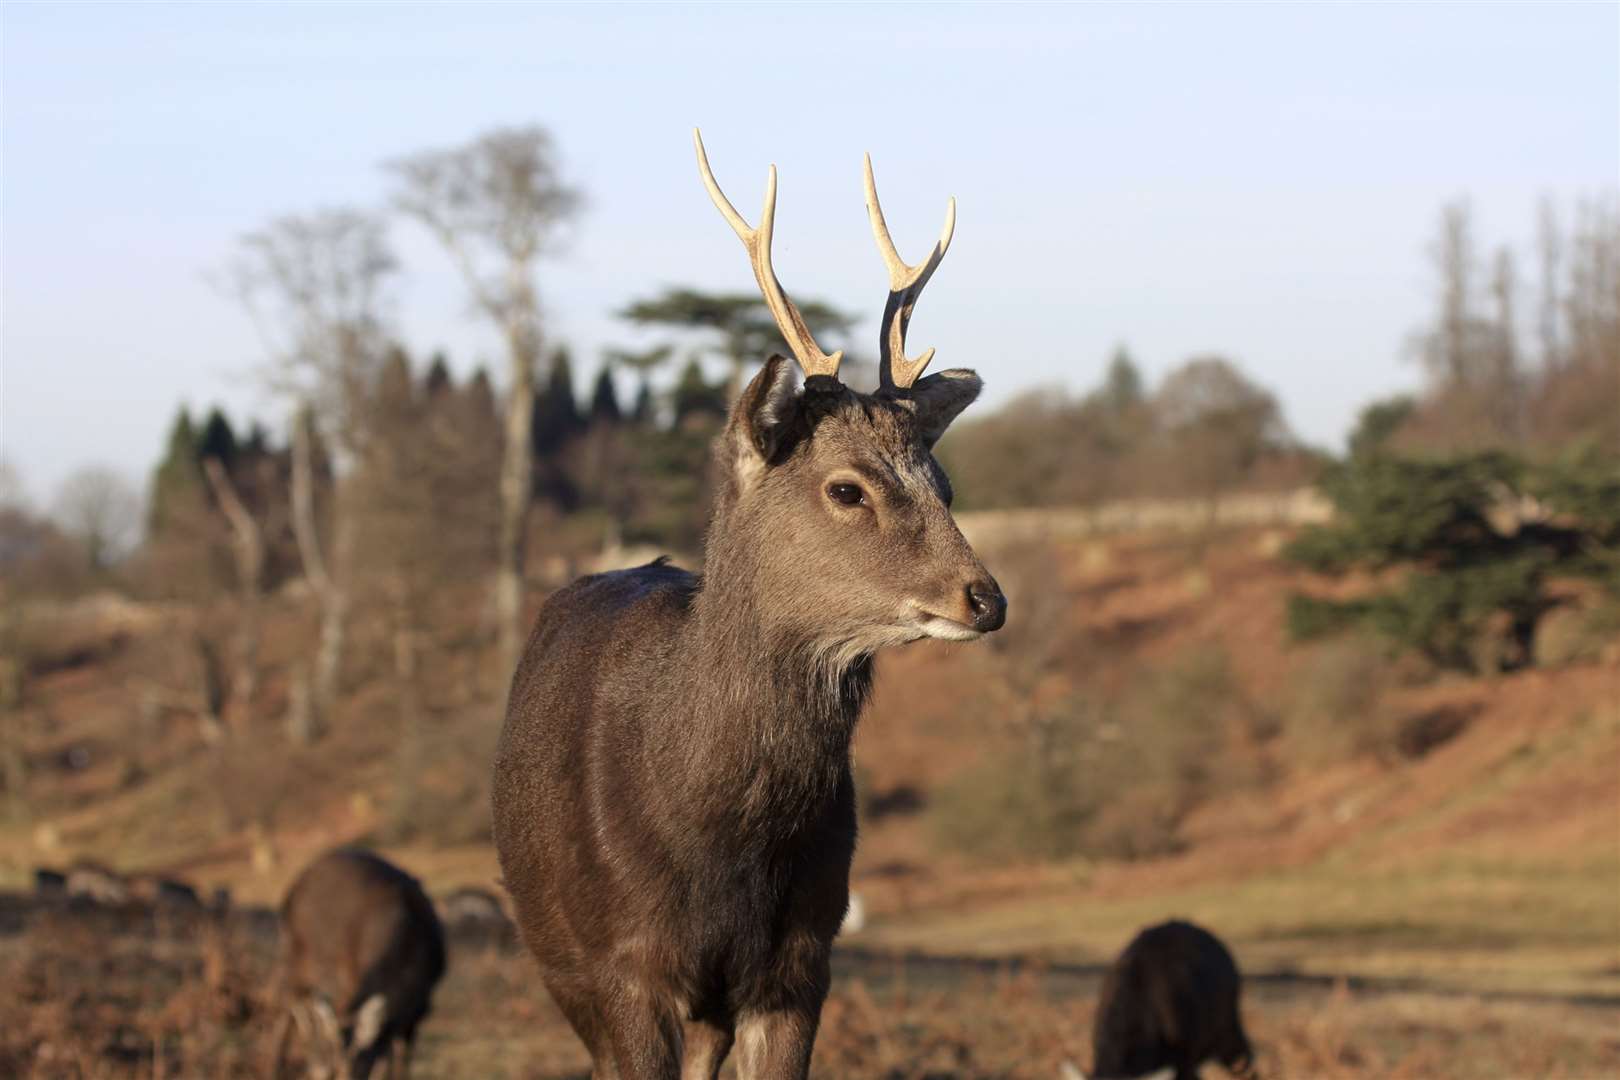 Visitors will be able to see the deer at Knole